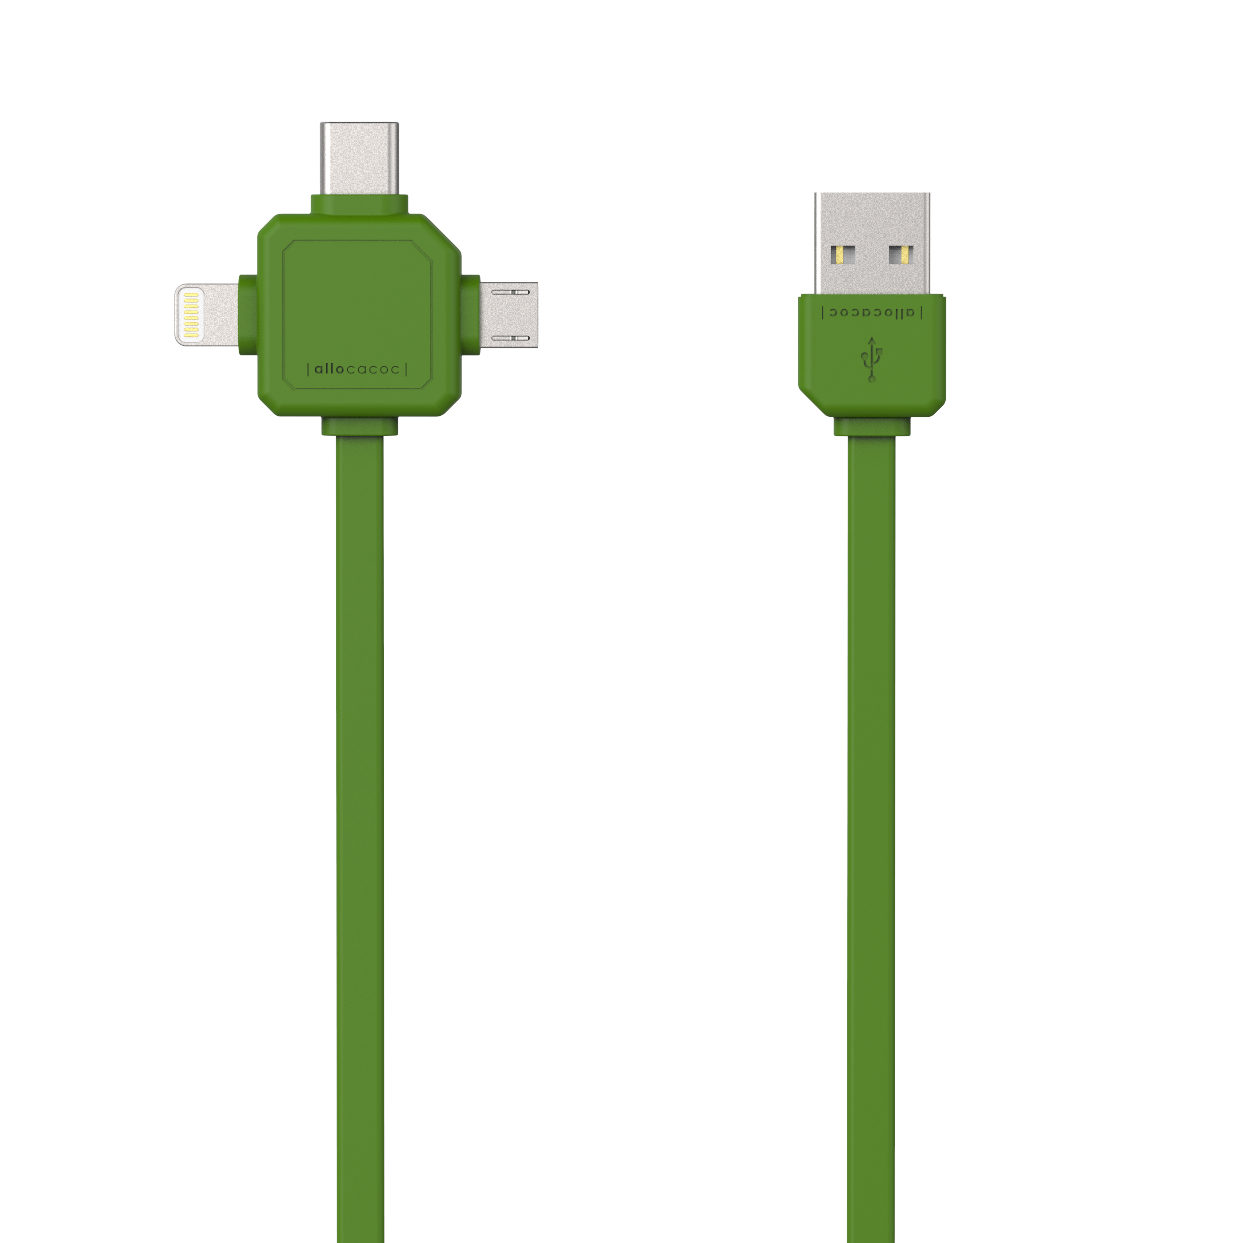 Image of Allocacoc 3-in-1 USB-kabel Groen